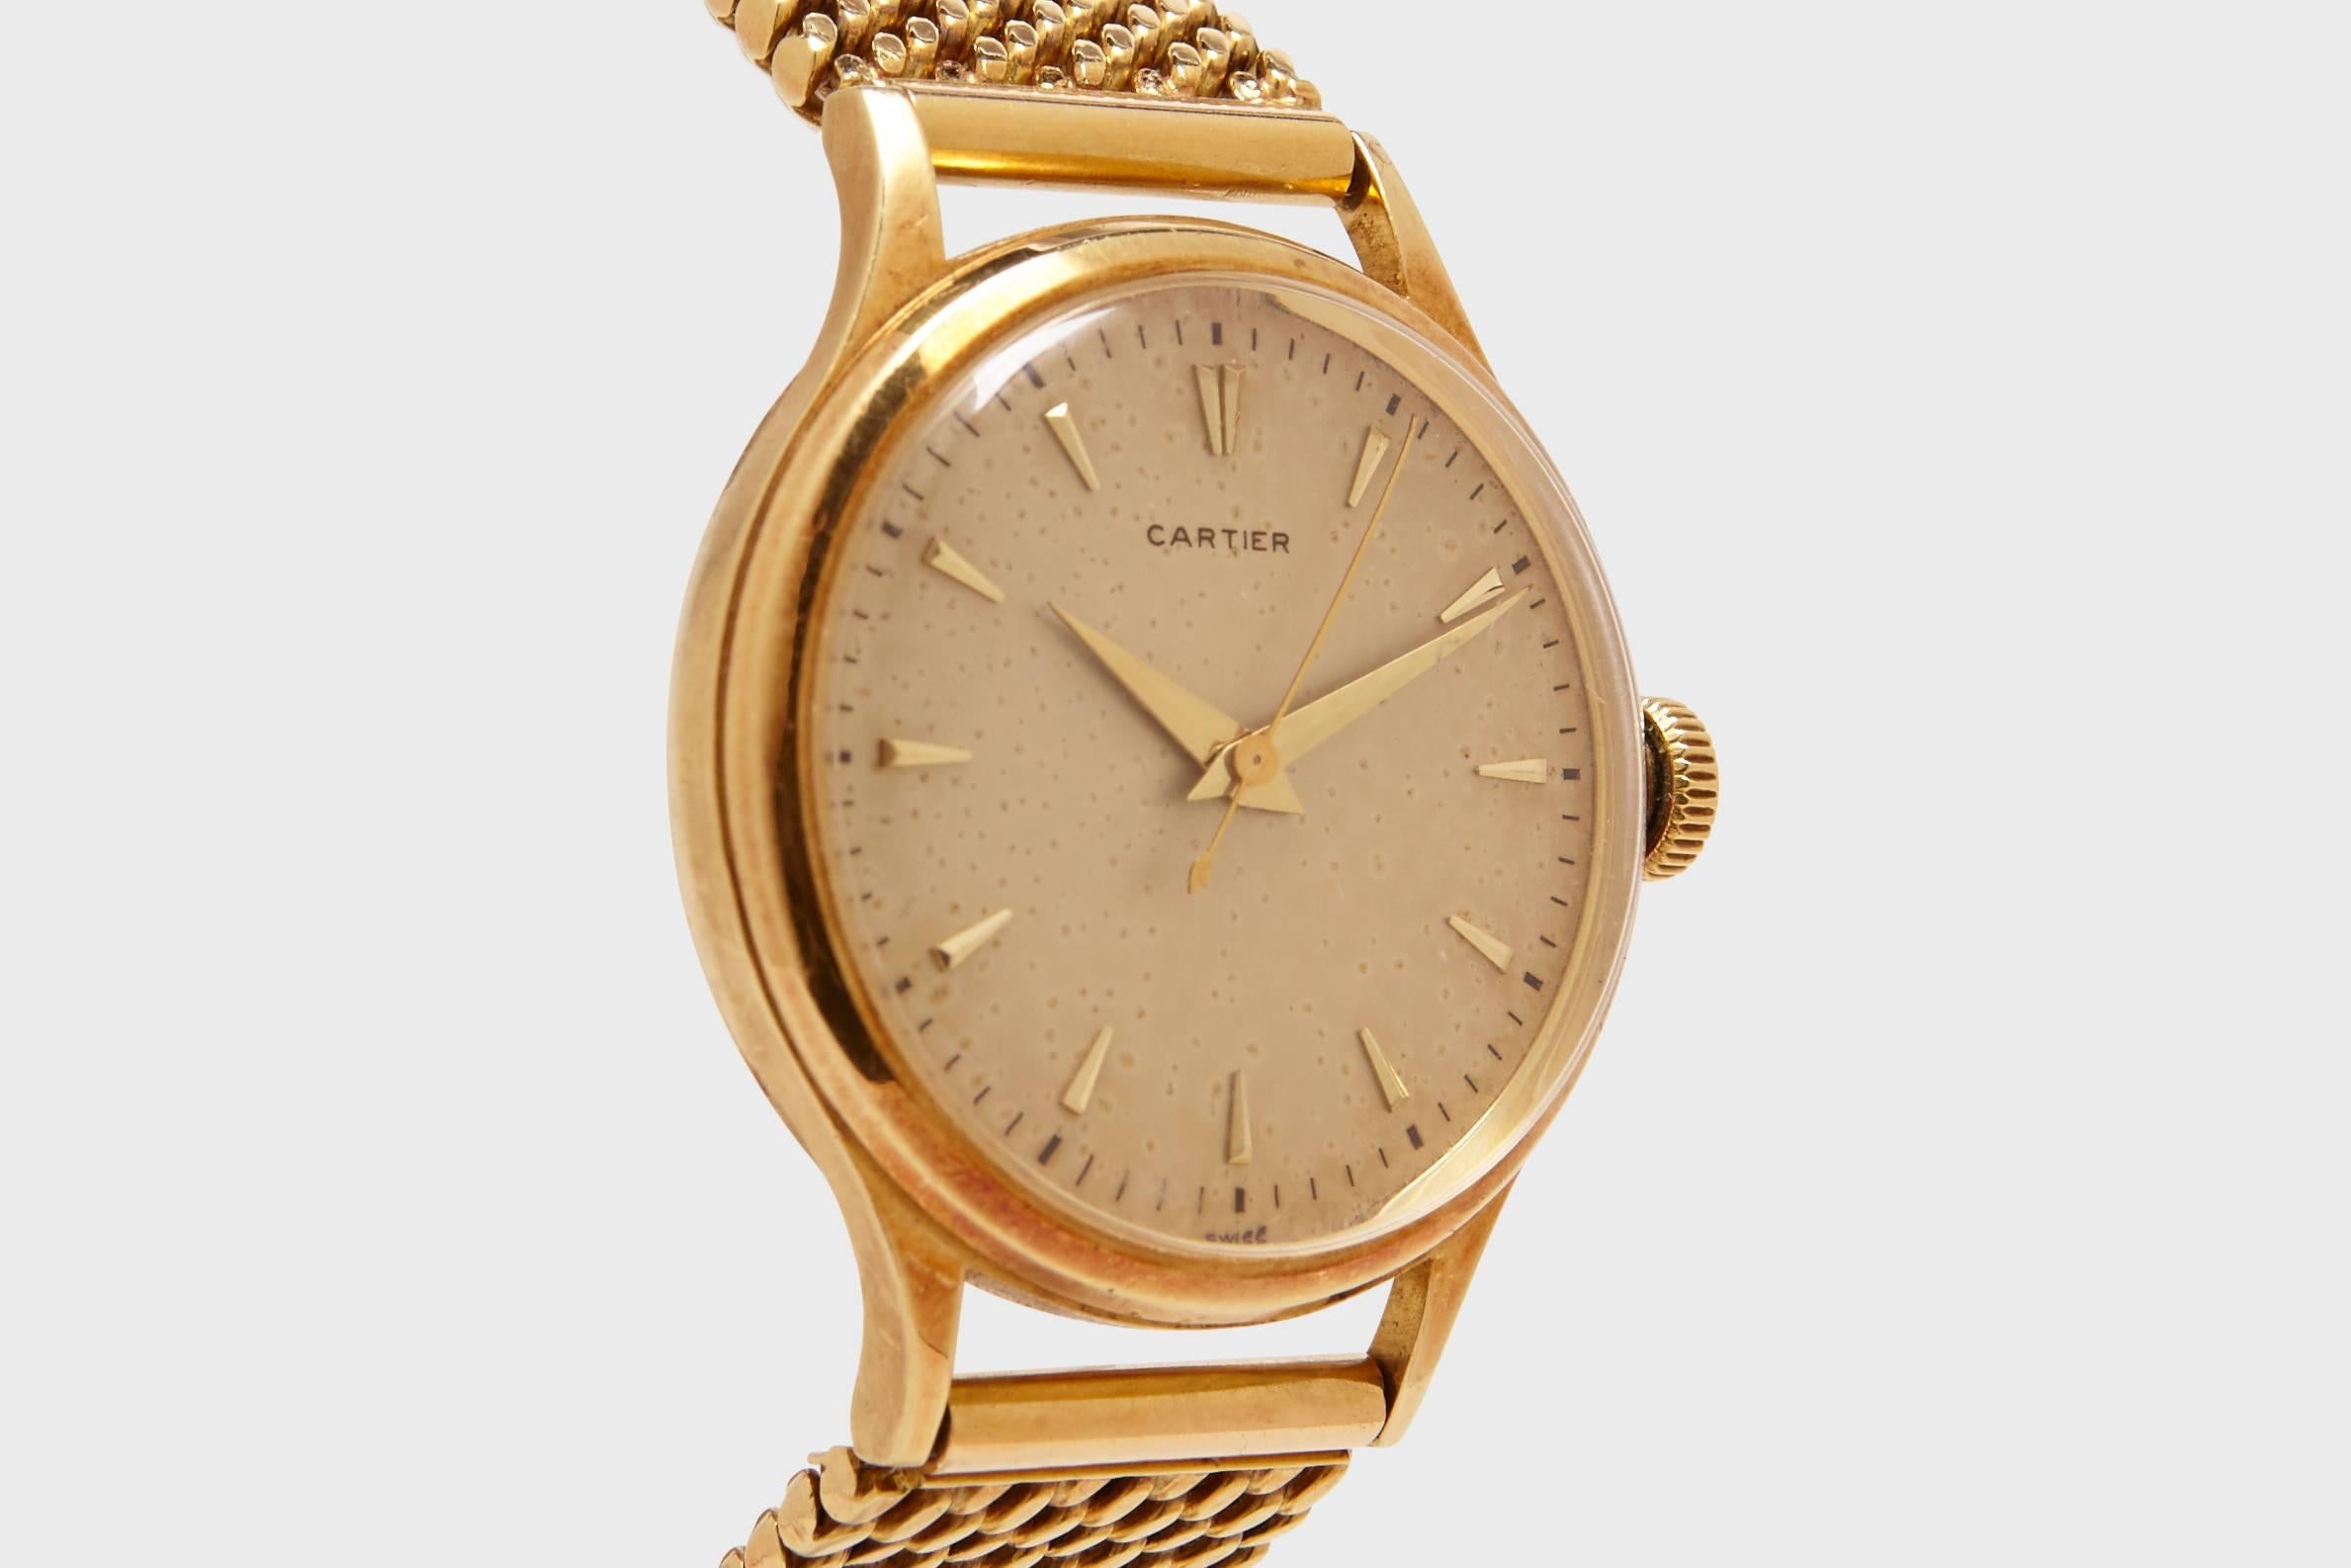 A solid eighteen carat gold Cartier mens dress watch on a Cartier solid eighteen carat gold mesh band. This is an exceptional quality, superb condition watch that is extremely rare watch. 

This Cartier is a classic, elegant watch design that